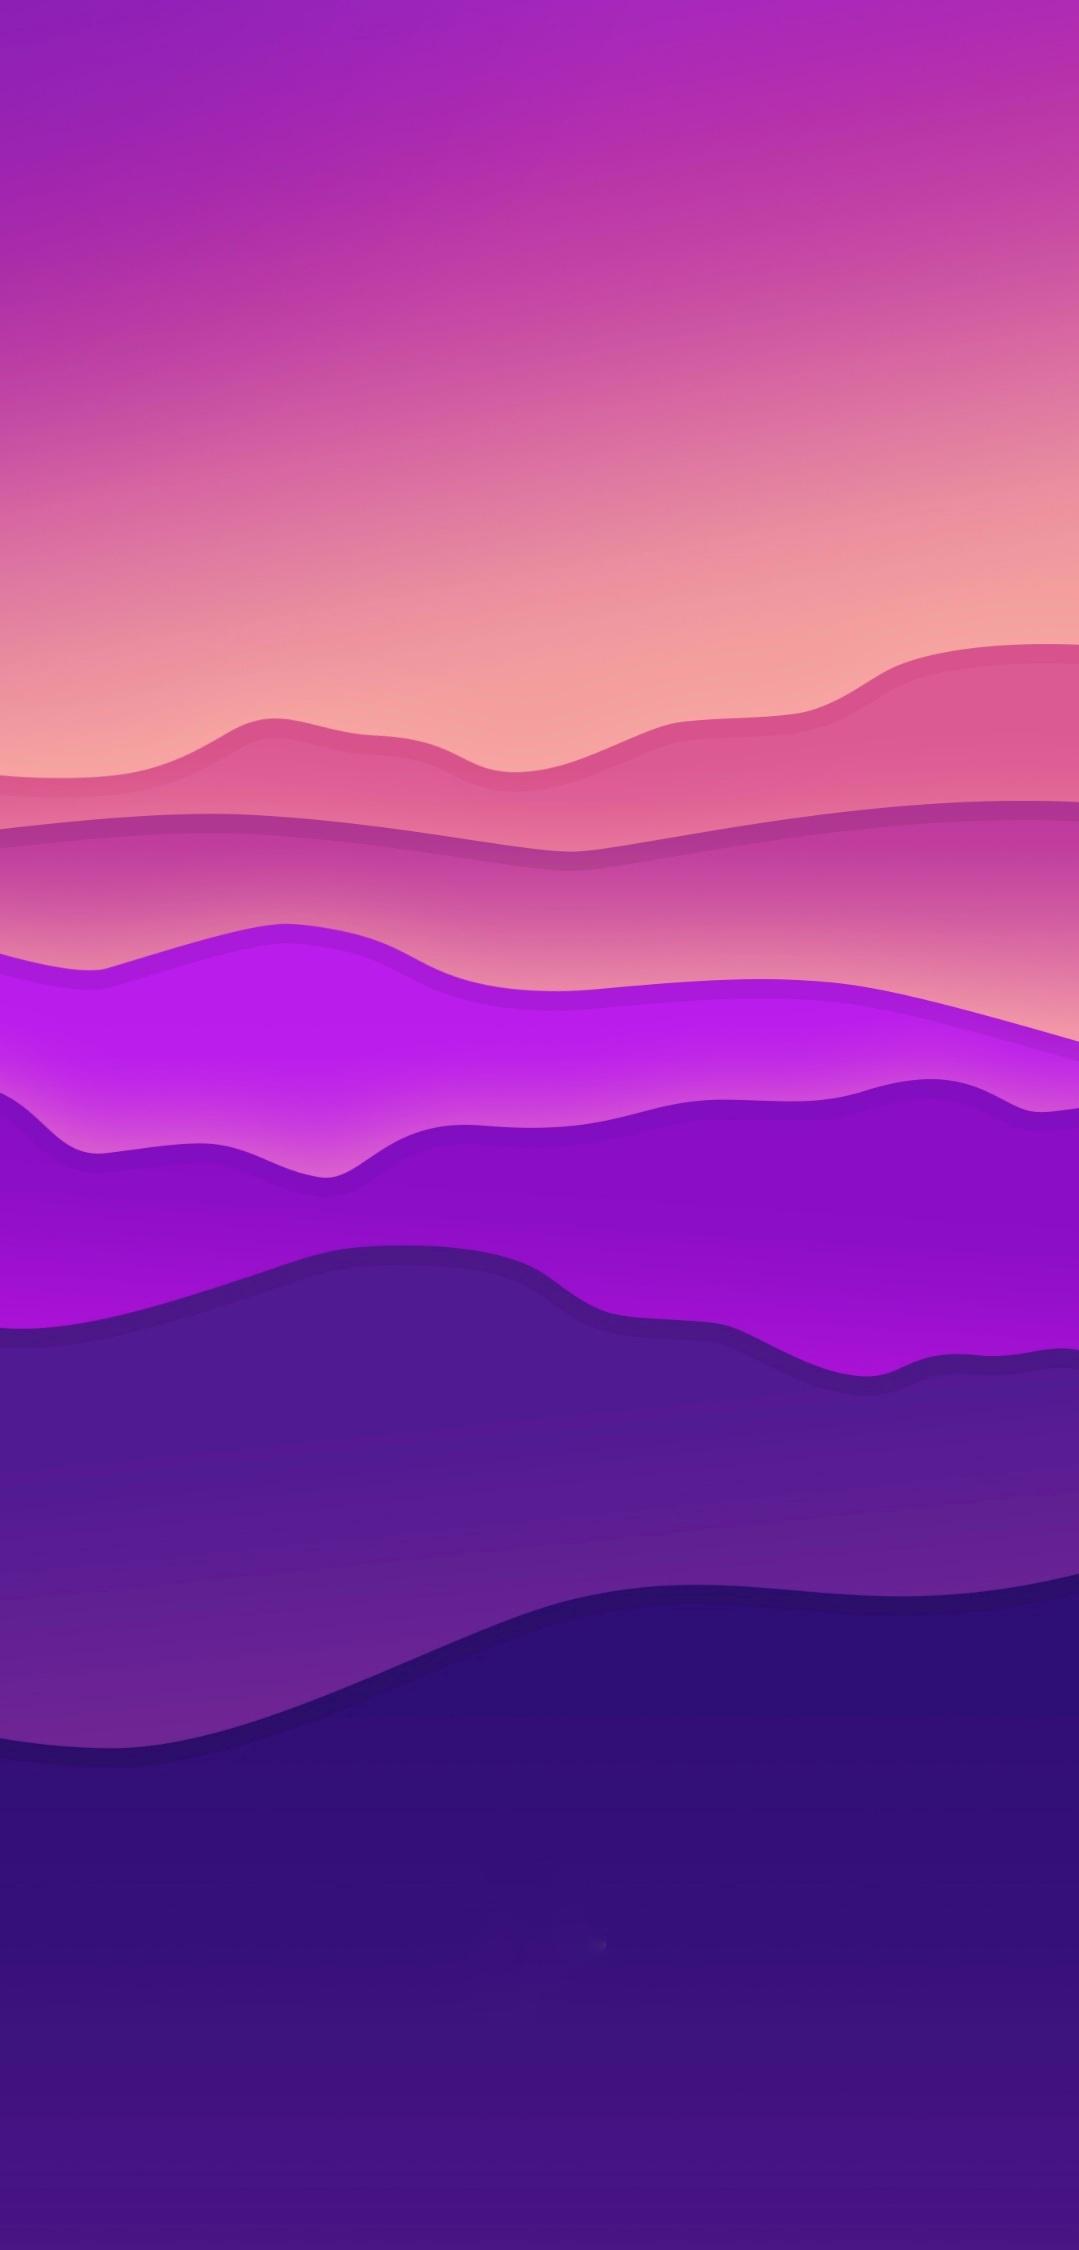 Wallpaper from The iPhone 12 Pro Unboxing video